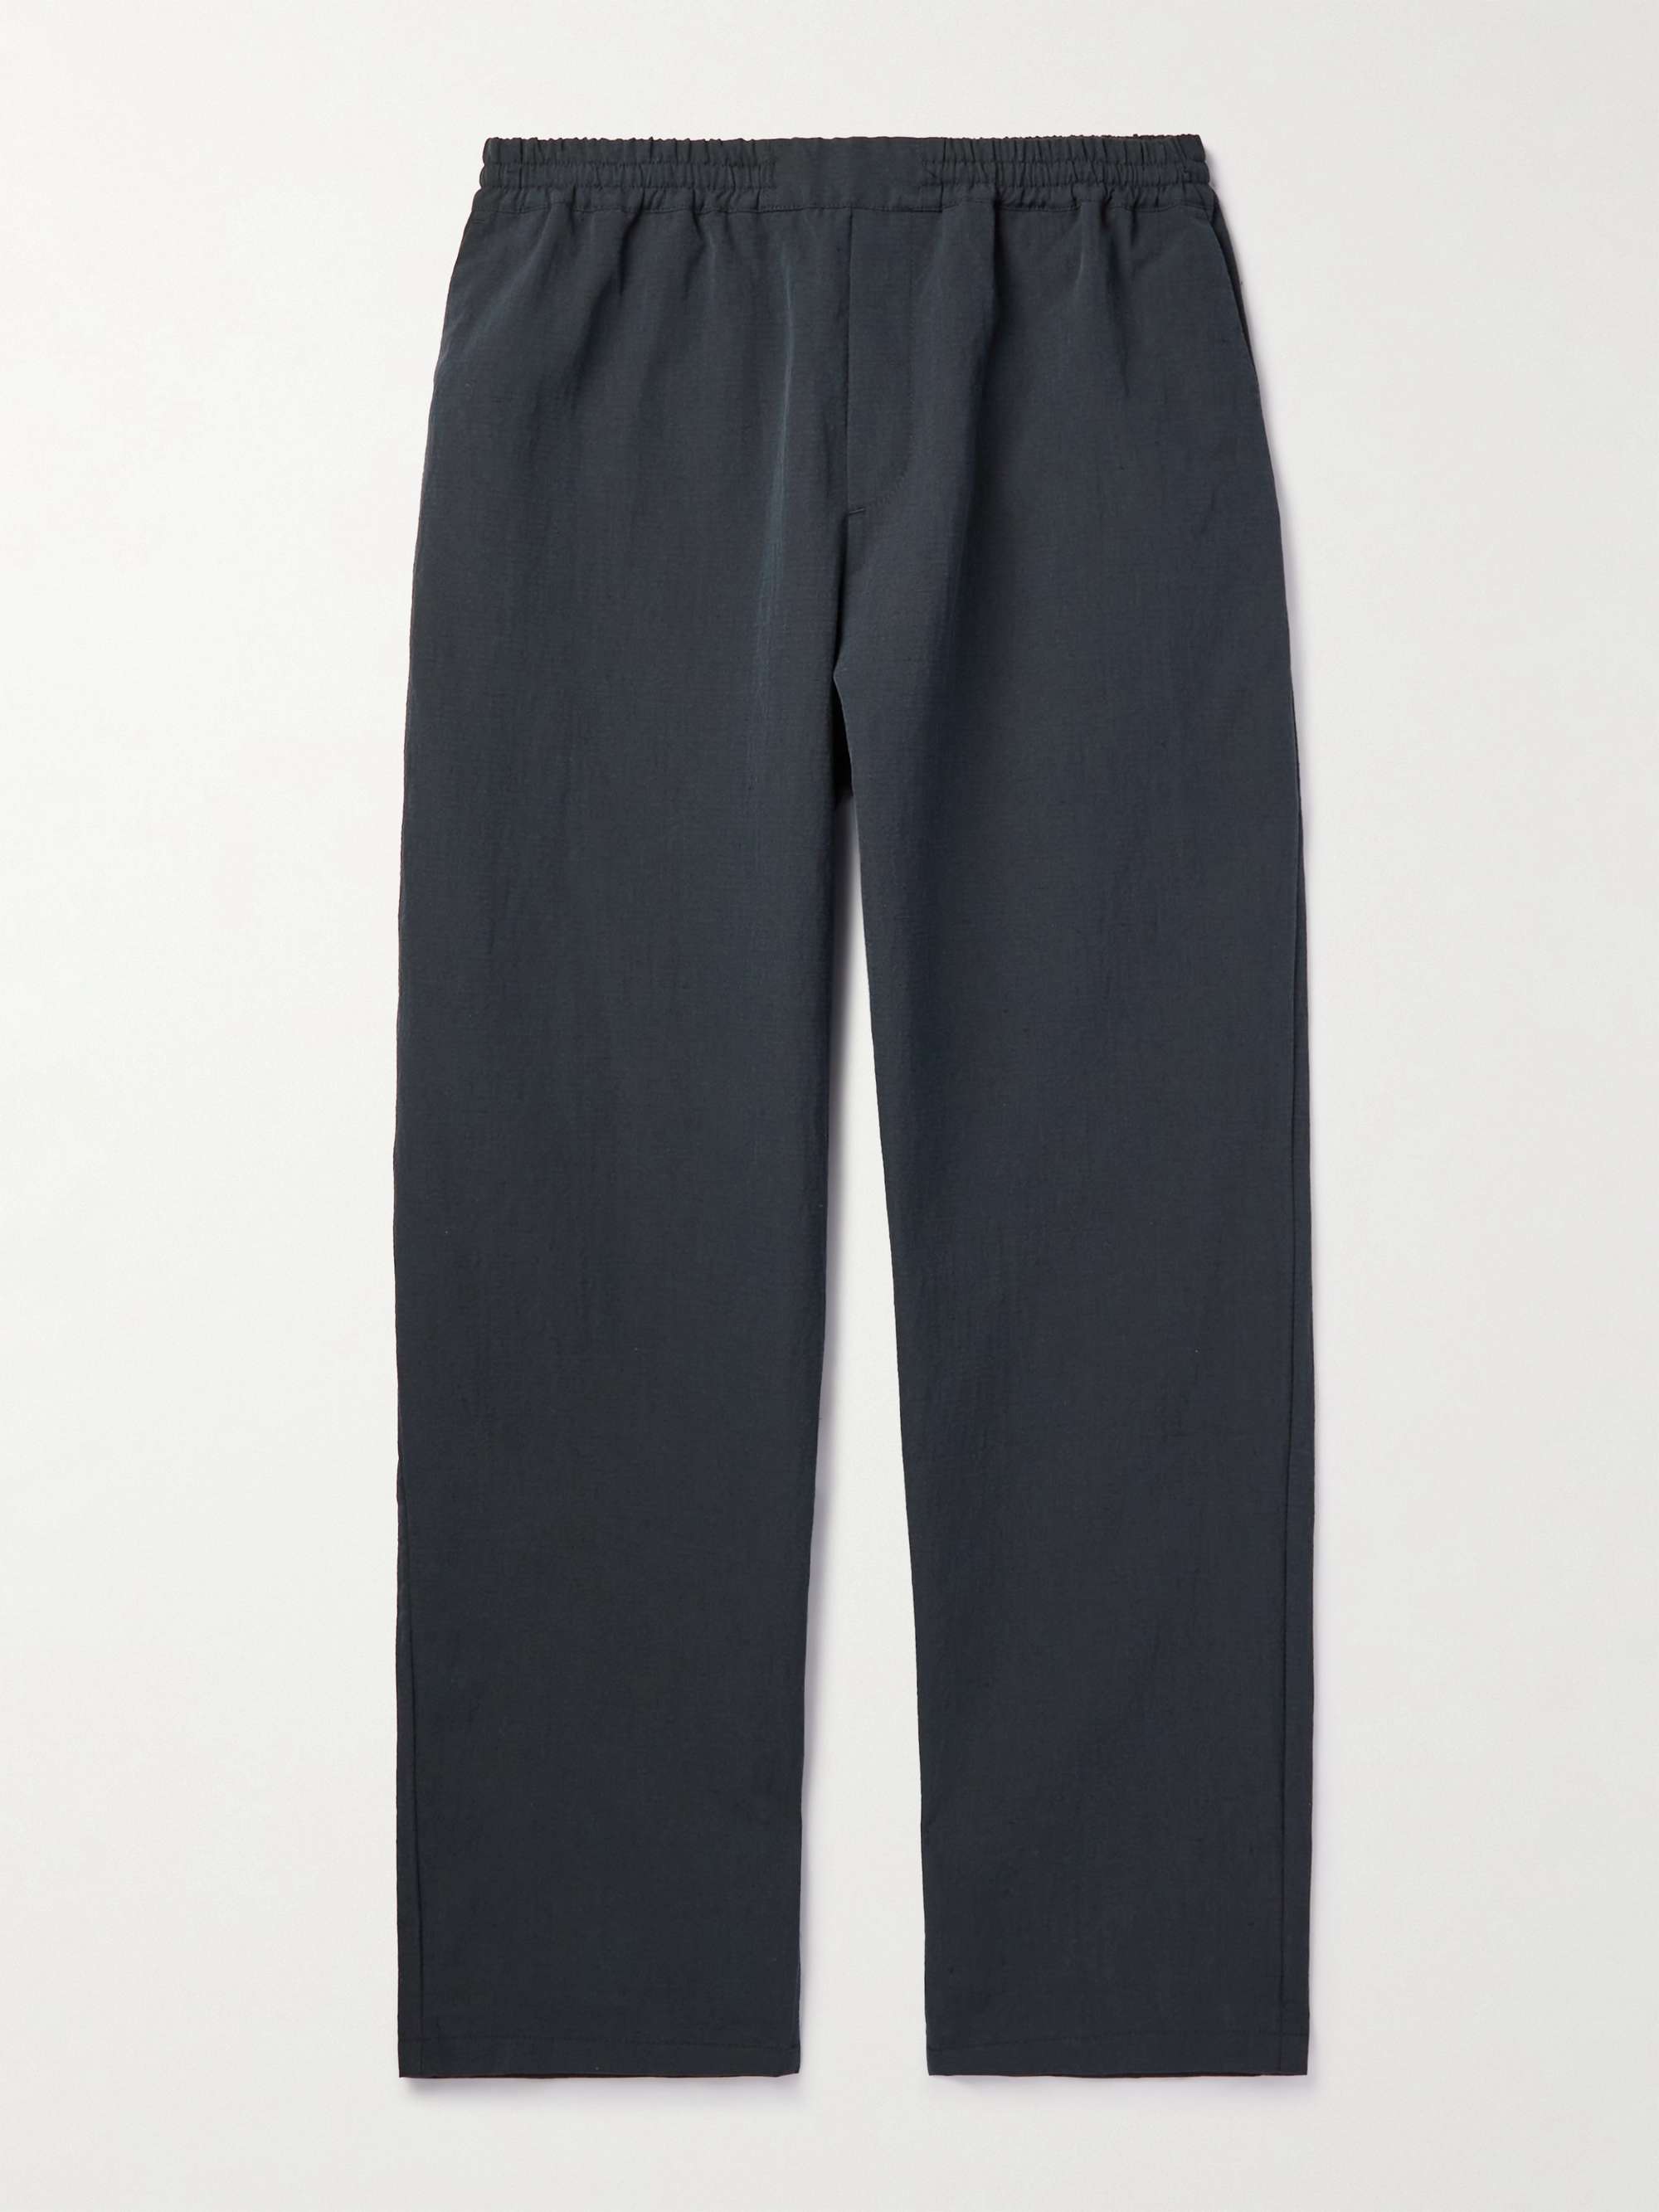 A KIND OF GUISE Banasa Straight-Leg Cotton and Linen-Blend